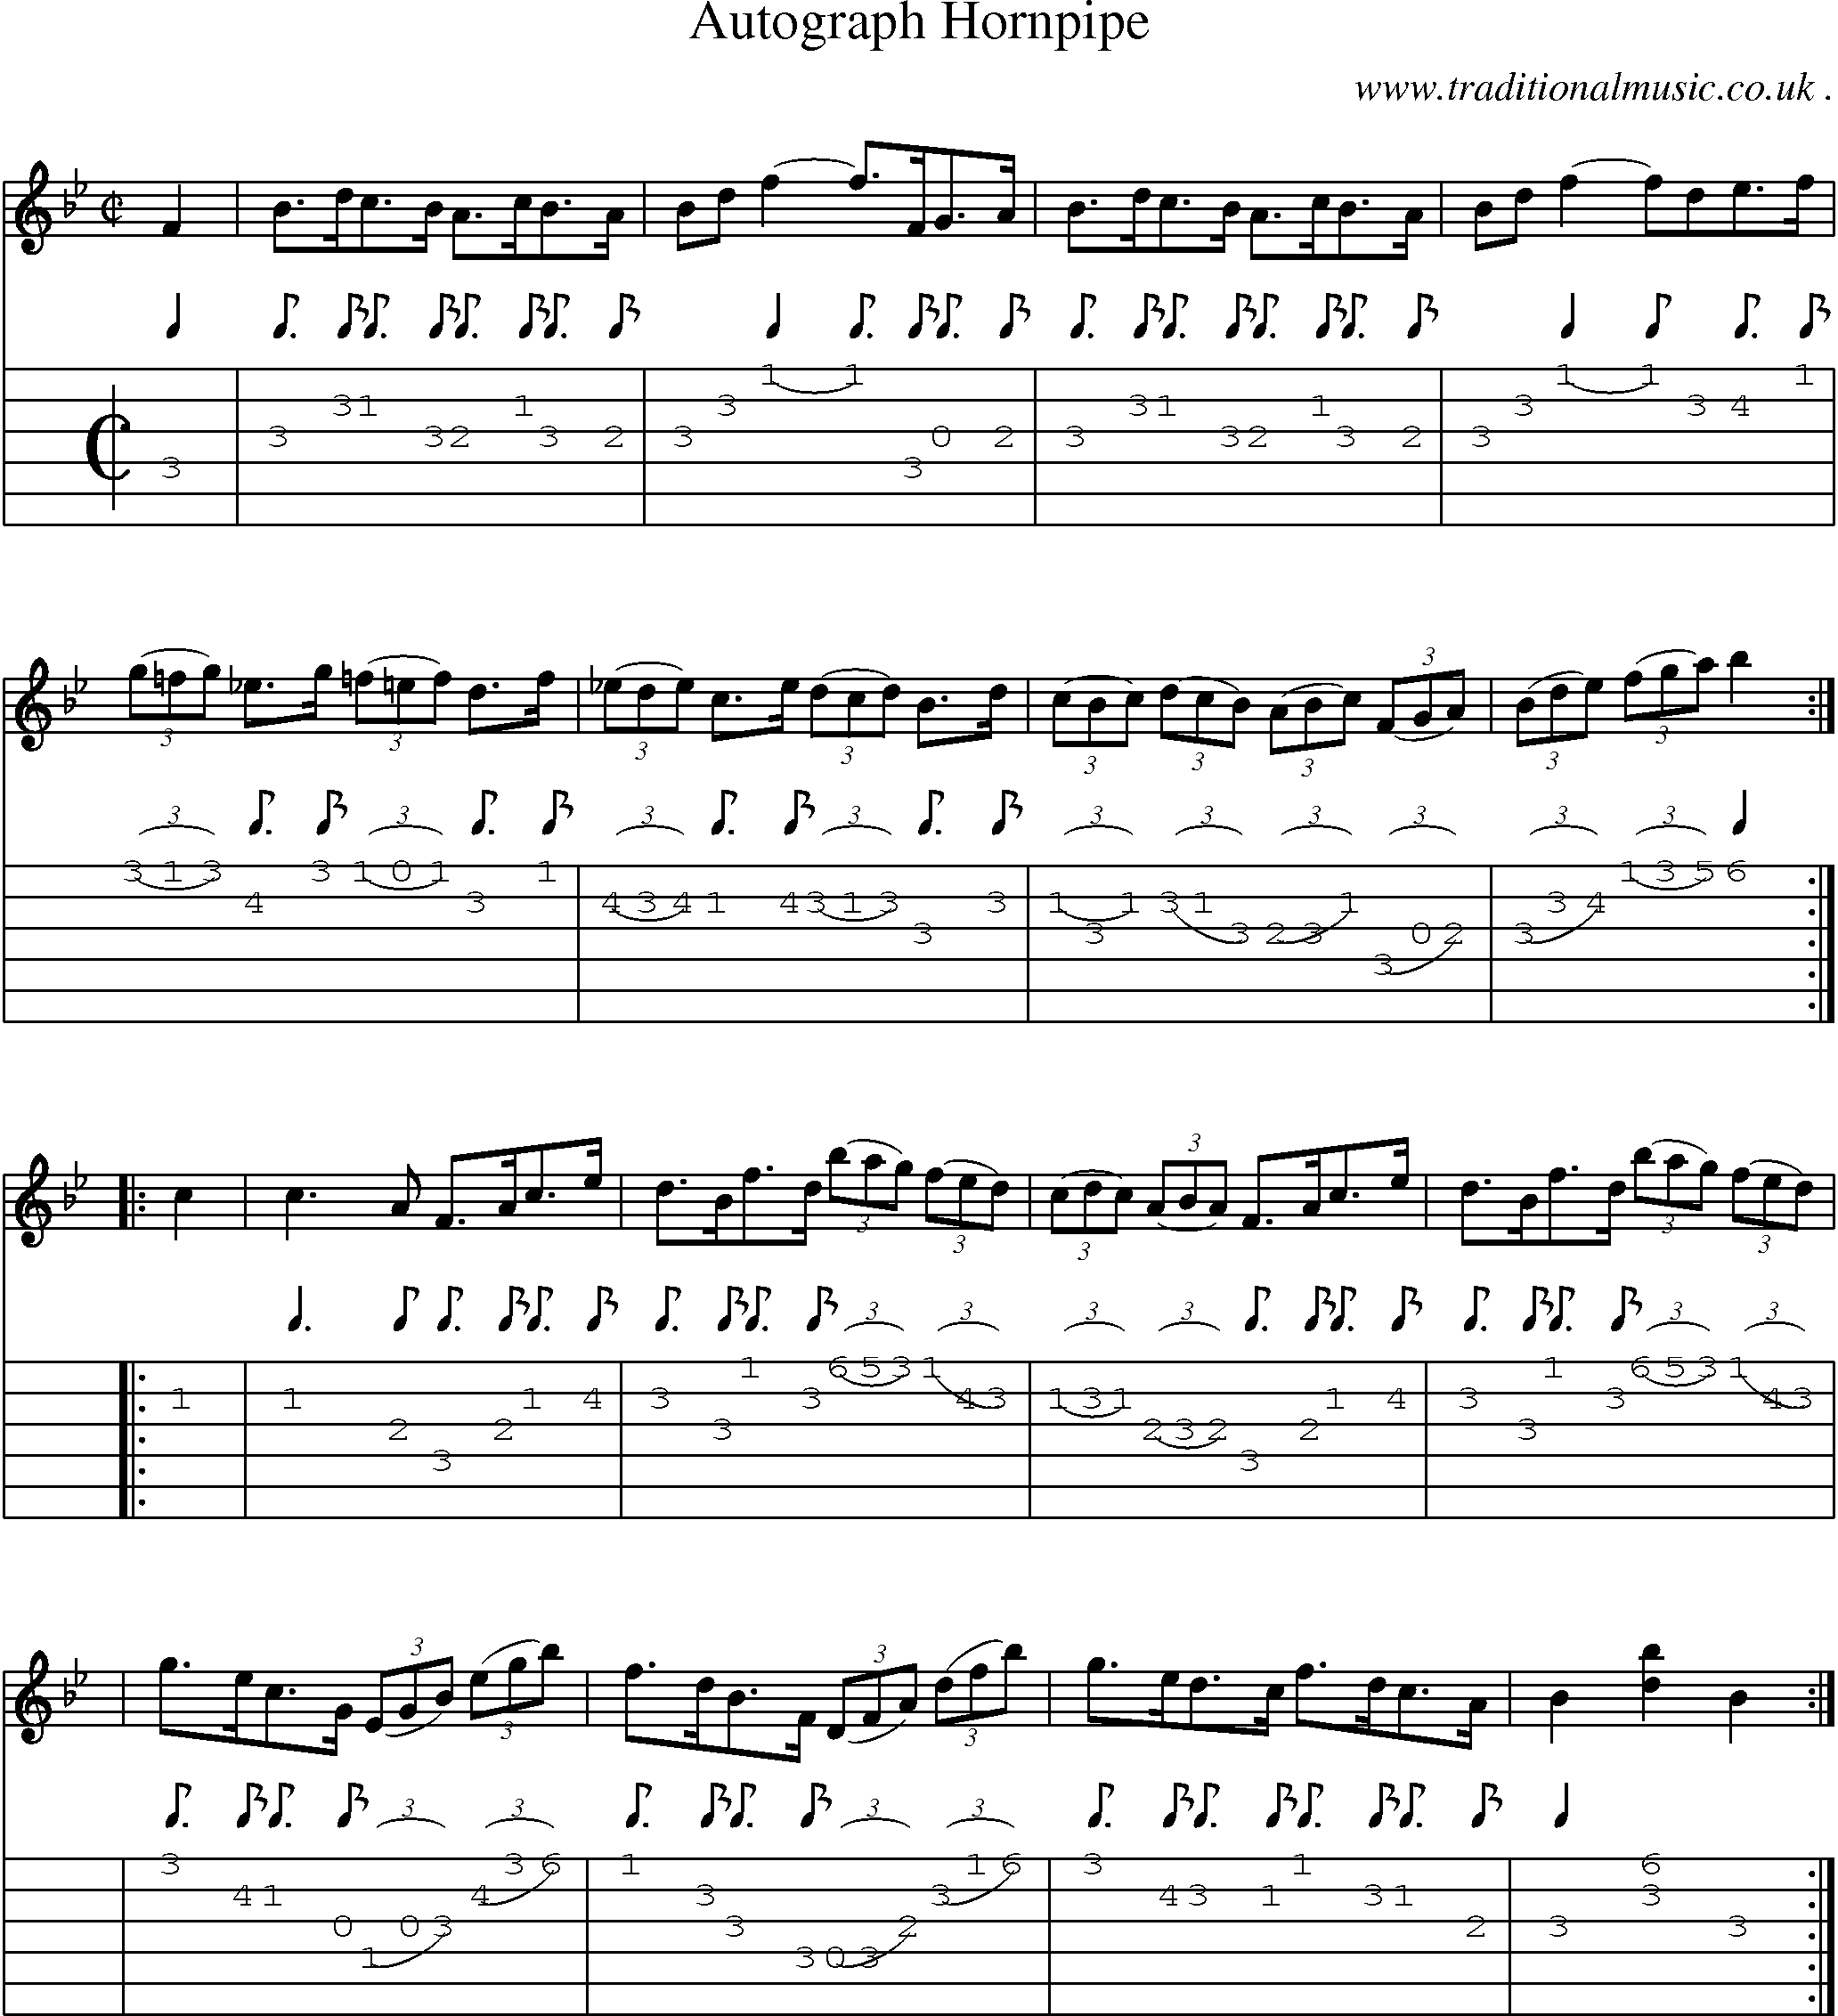 Sheet-Music and Guitar Tabs for Autograph Hornpipe